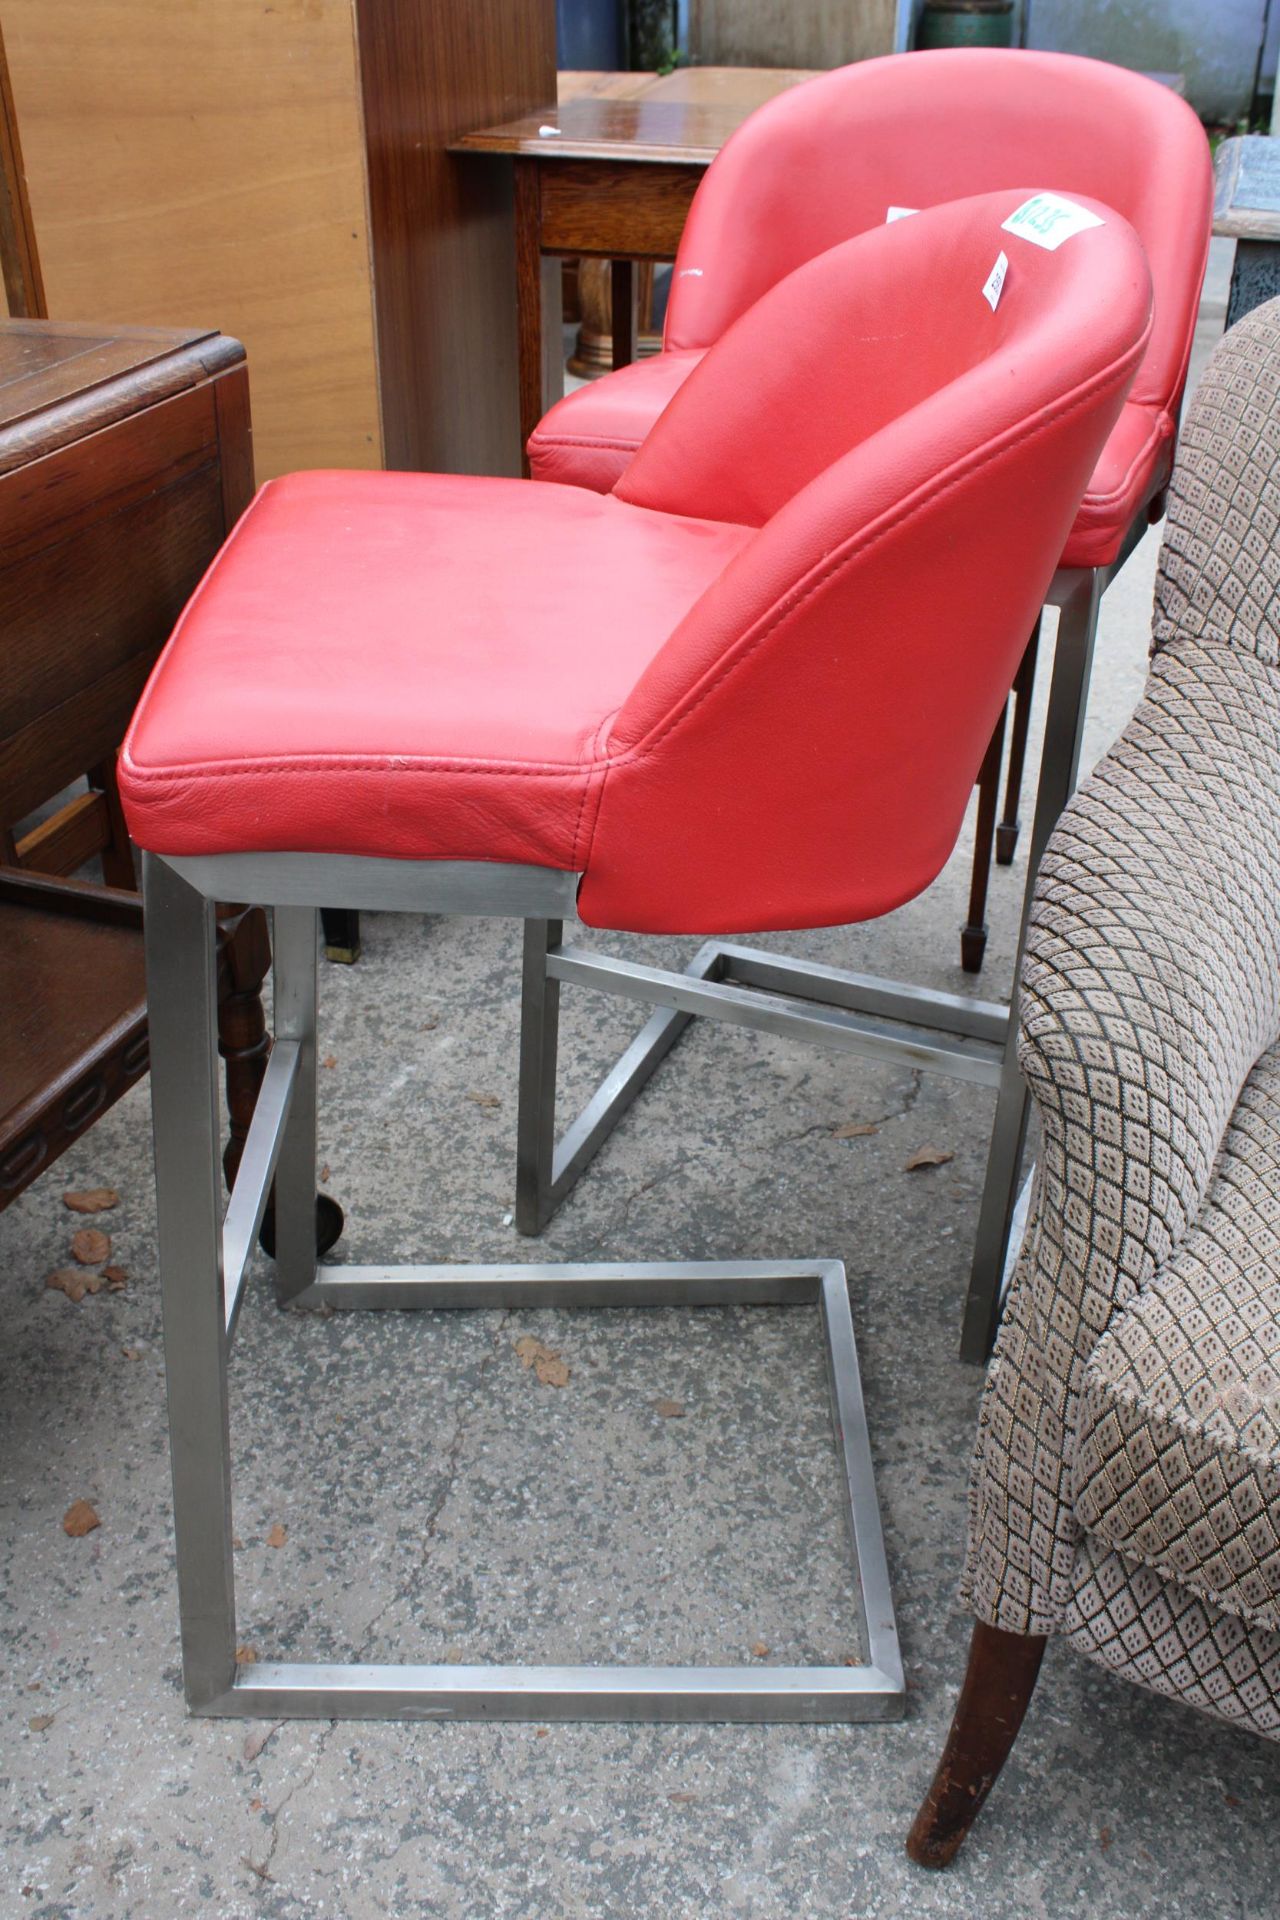 A PAIR OF HIGH BACK BAR STOOLS, STAINLESS STEEL FRAME WITH BRIGHT RED SEATS - Image 2 of 2